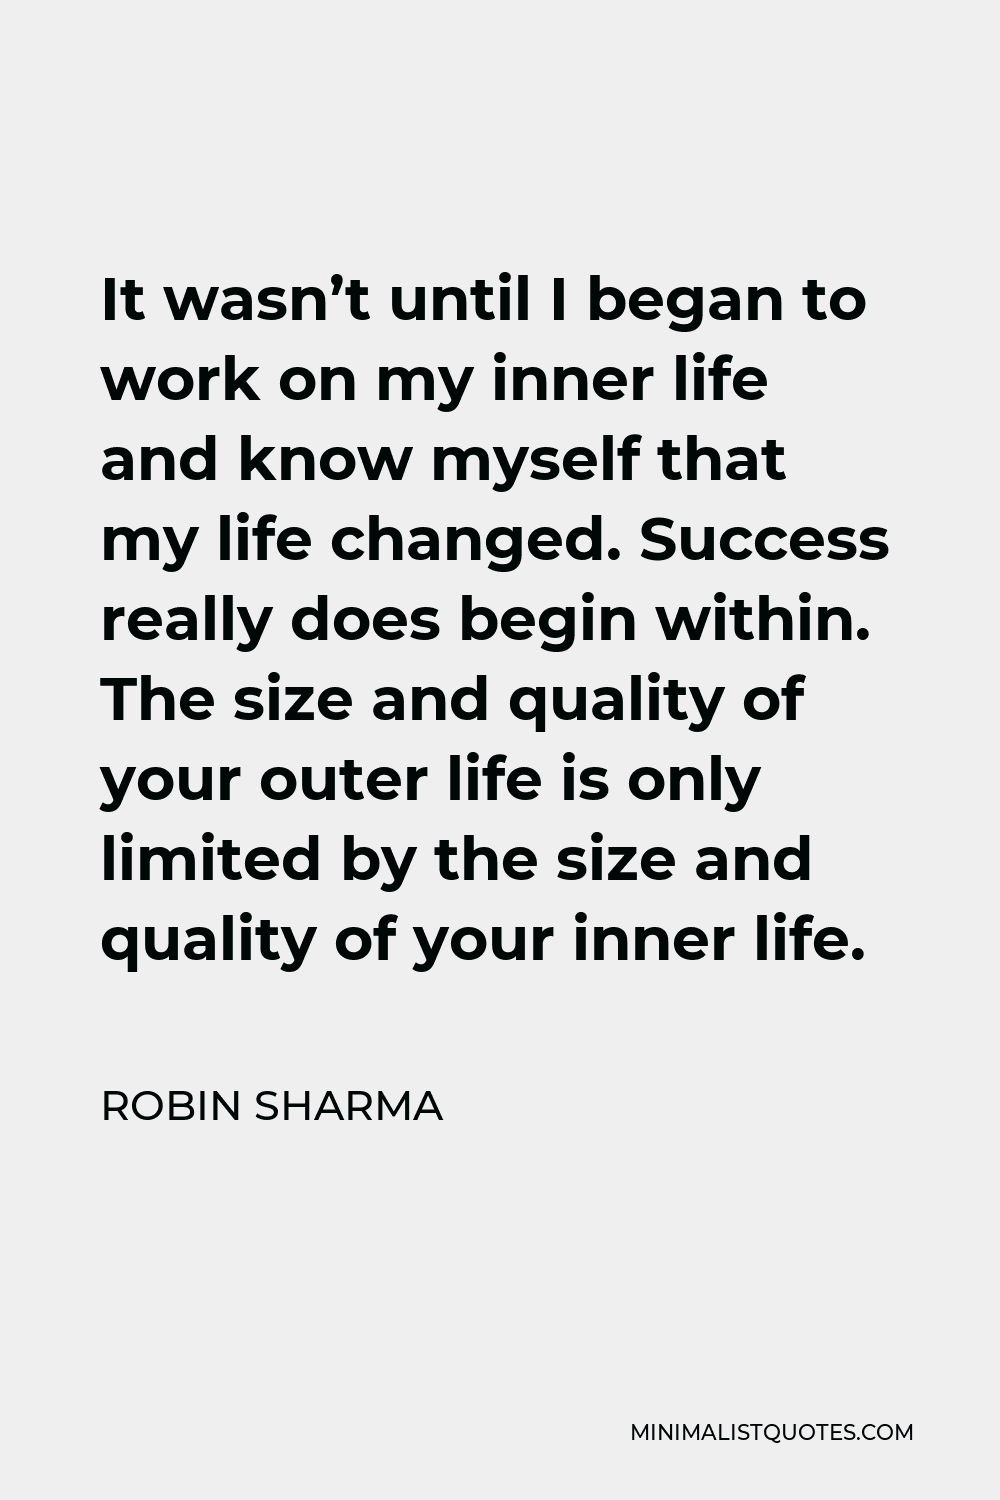 Robin Sharma Quote - It wasn’t until I began to work on my inner life and know myself that my life changed. Success really does begin within. The size and quality of your outer life is only limited by the size and quality of your inner life.